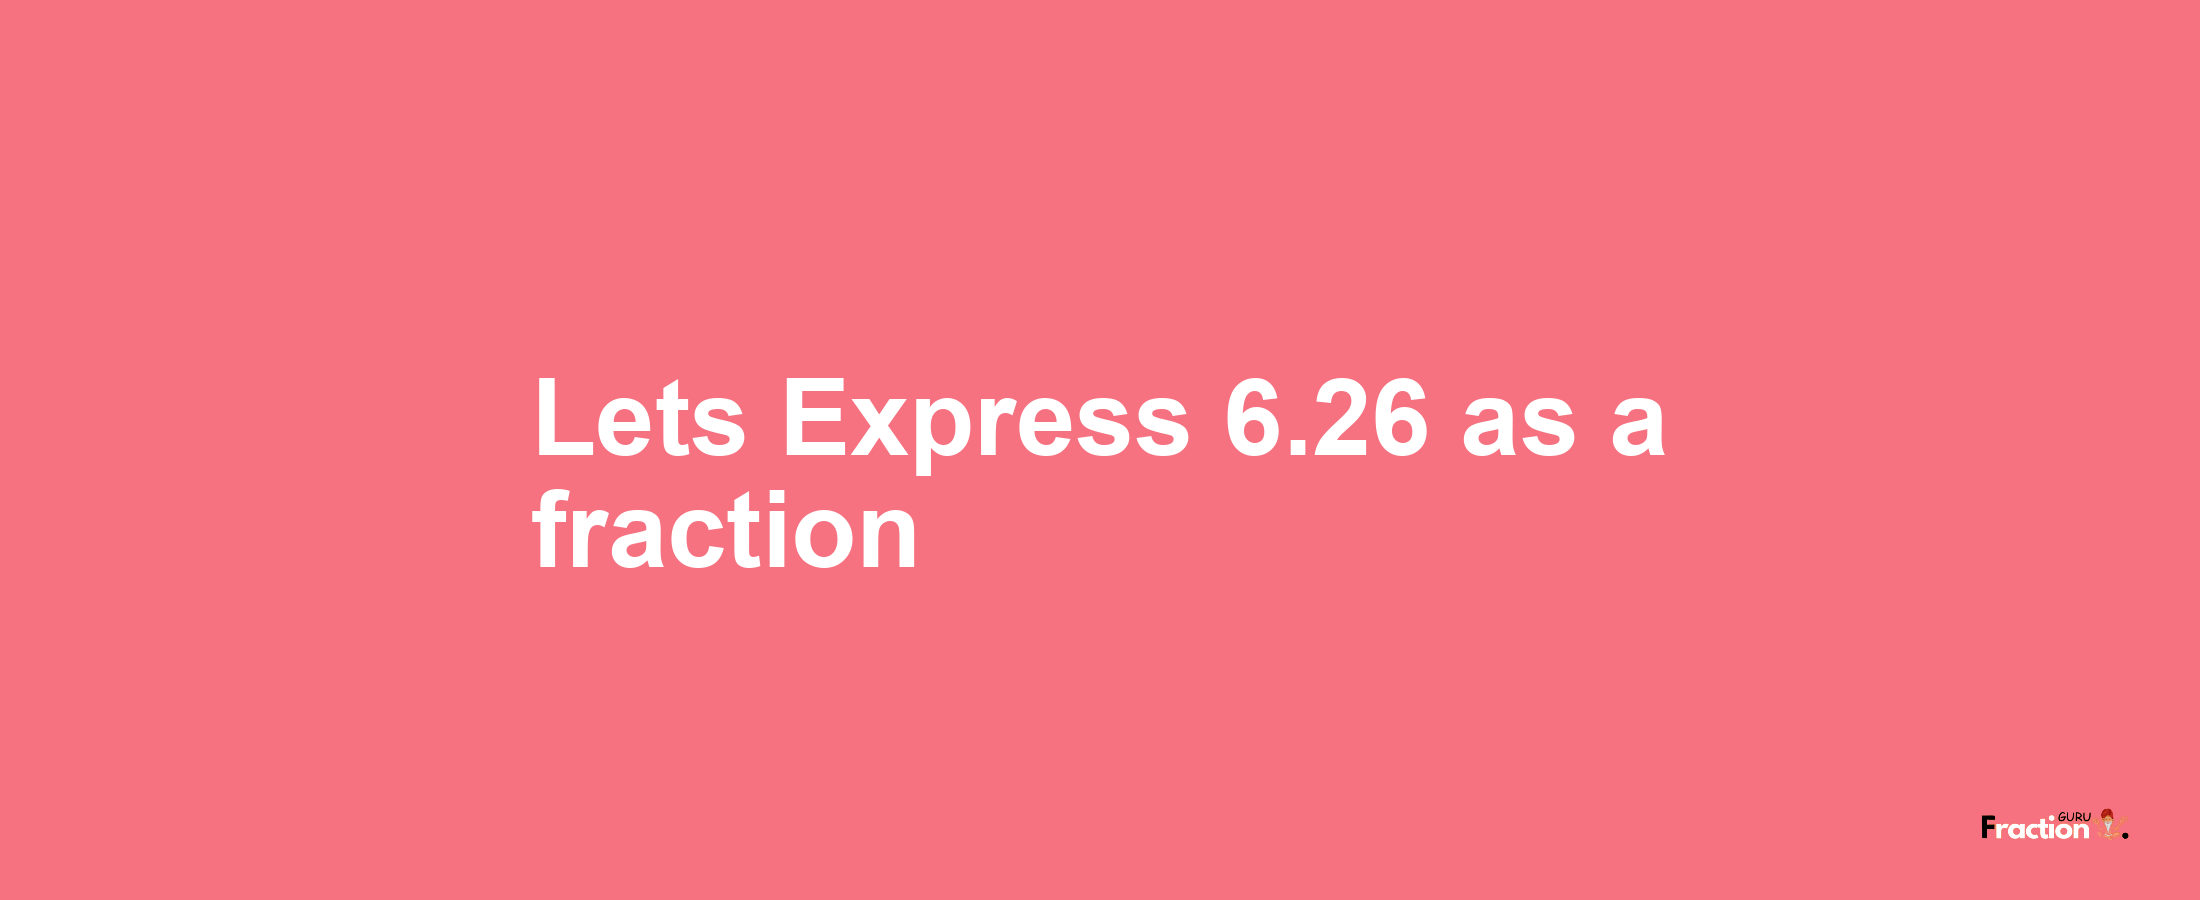 Lets Express 6.26 as afraction